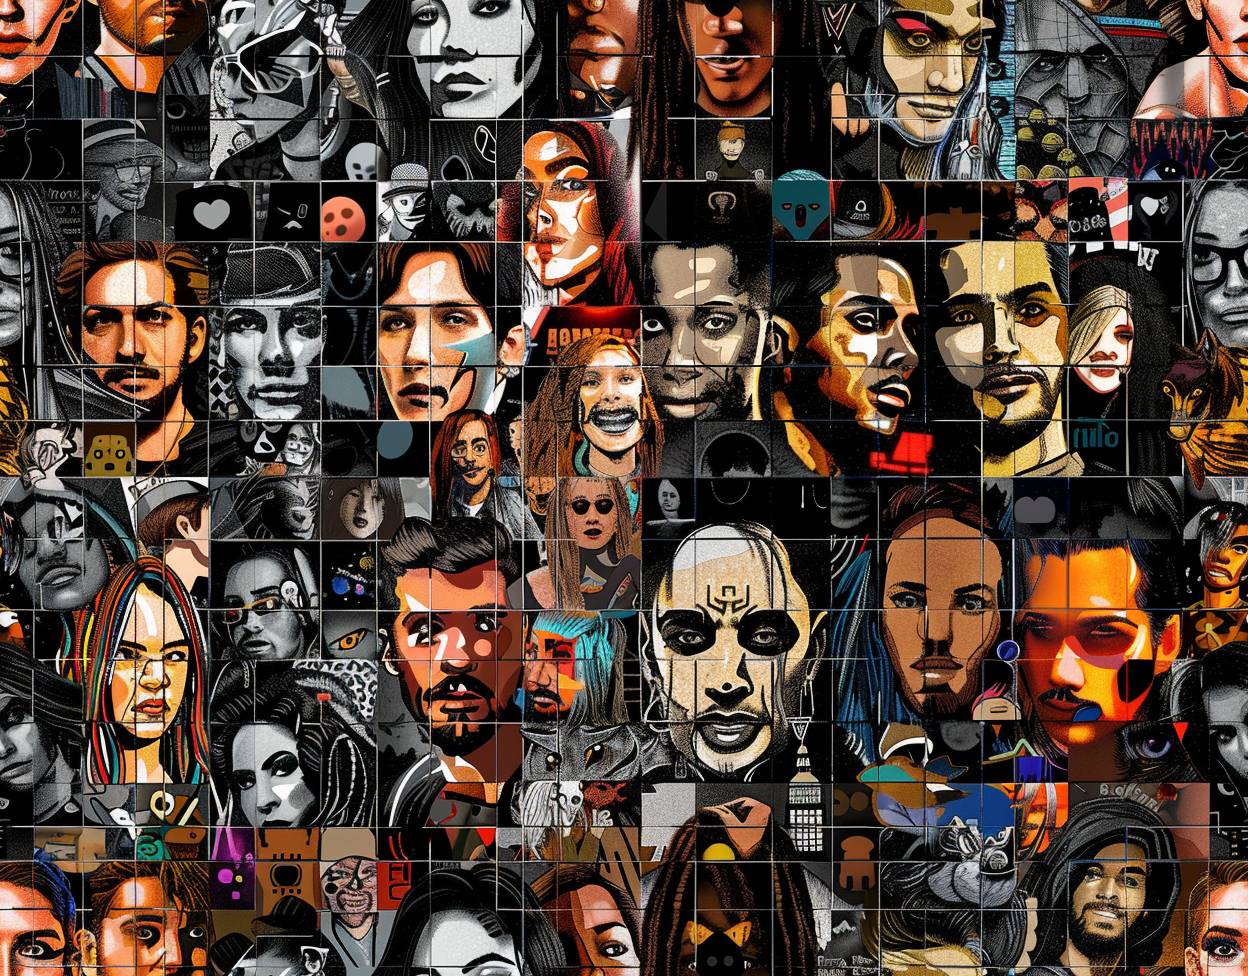 Create a collage of YouTuber icons in a 64 by 50 grid filling the canvas. Flat and two-dimensional, the people should look young and handsome/beautiful. Sprinkle in some animals. Vector art. Take the image, then drop the saturation down so that the image is almost entirely black but with the details still visible like an engraving. Posterize black and silver.